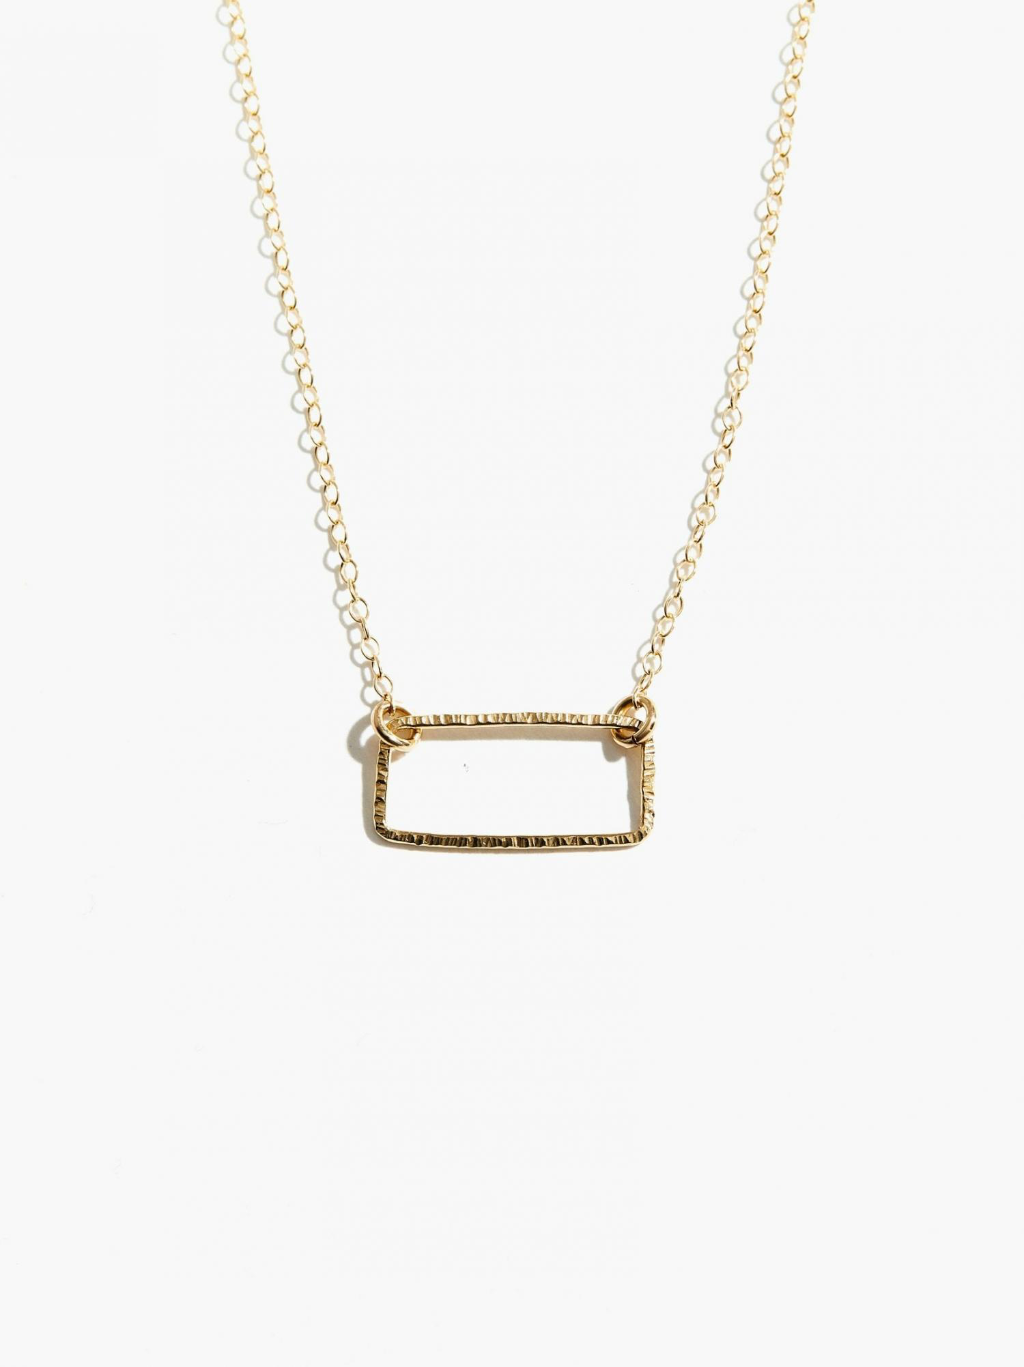 ABLE Floating Shape Necklace